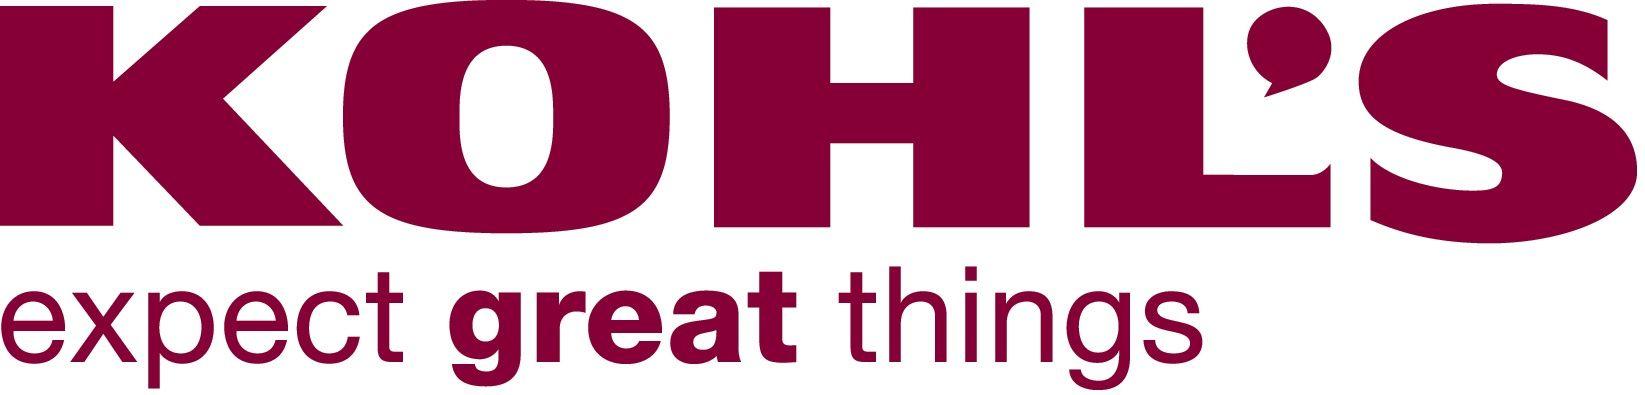 Kohls.com Logo - Kohl's Department Stores Opens Three New Stores, Remodels 30 This